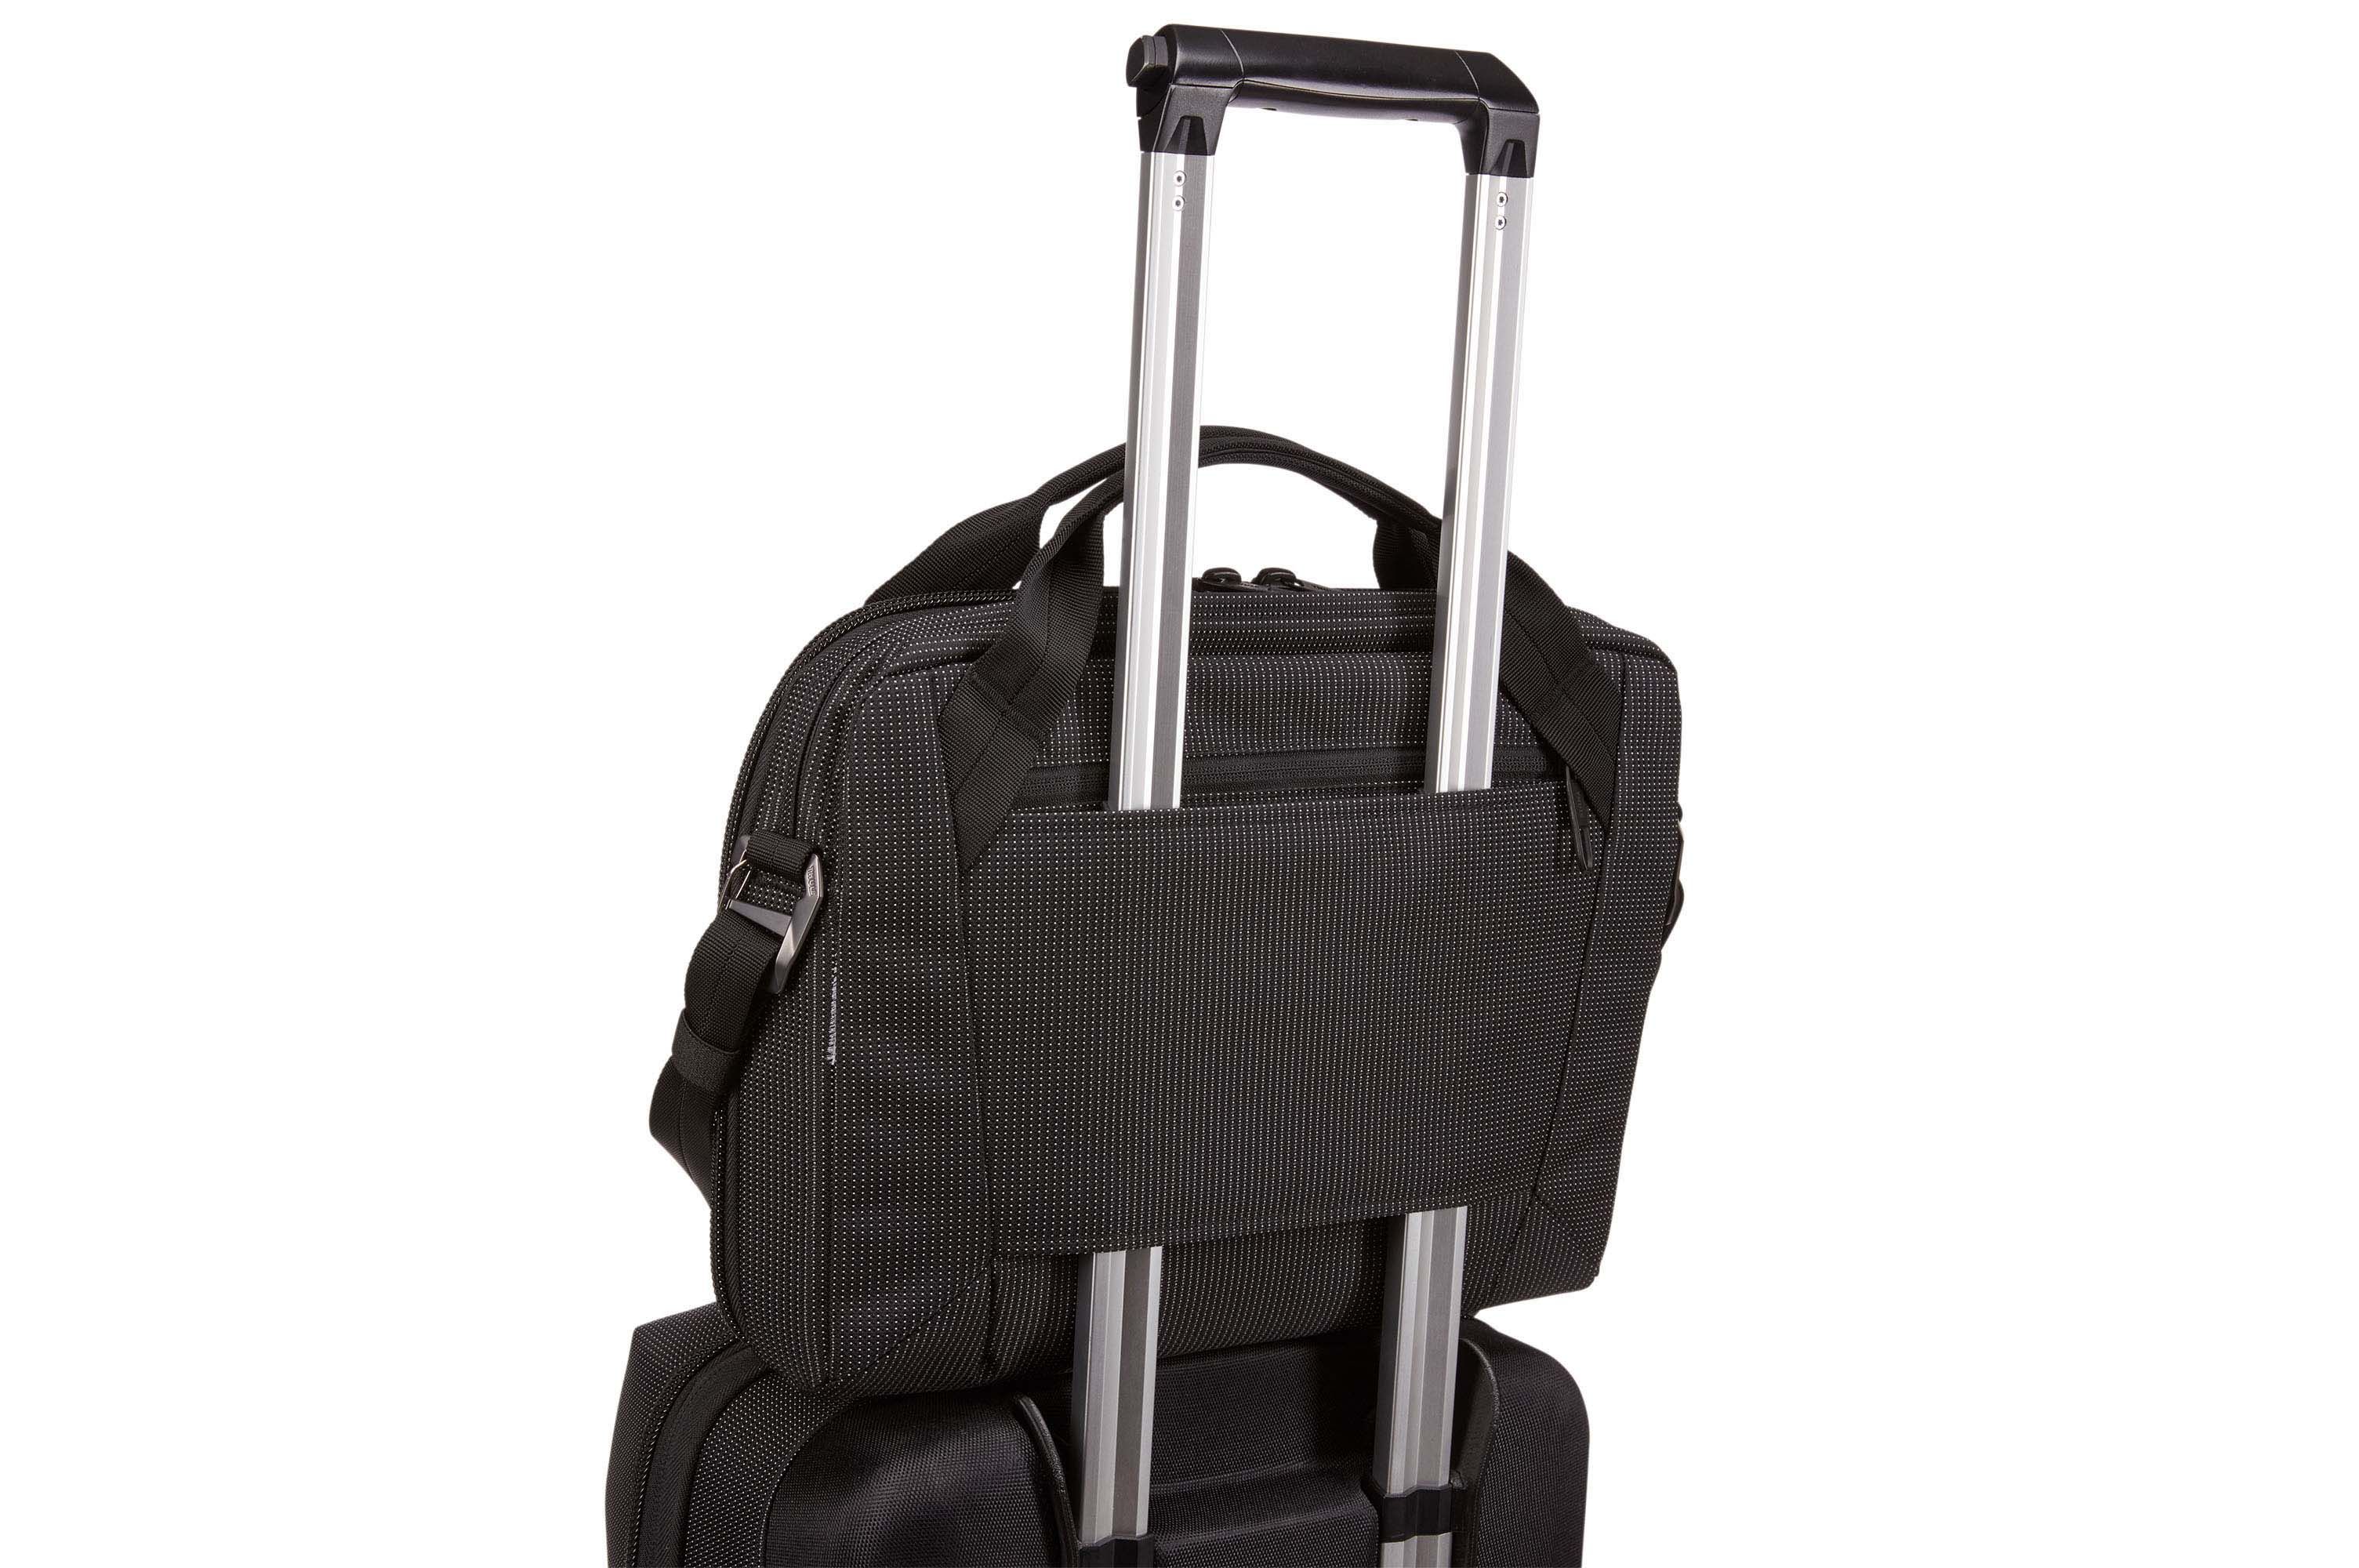 Thule_Crossover_2_Laptop_Bag